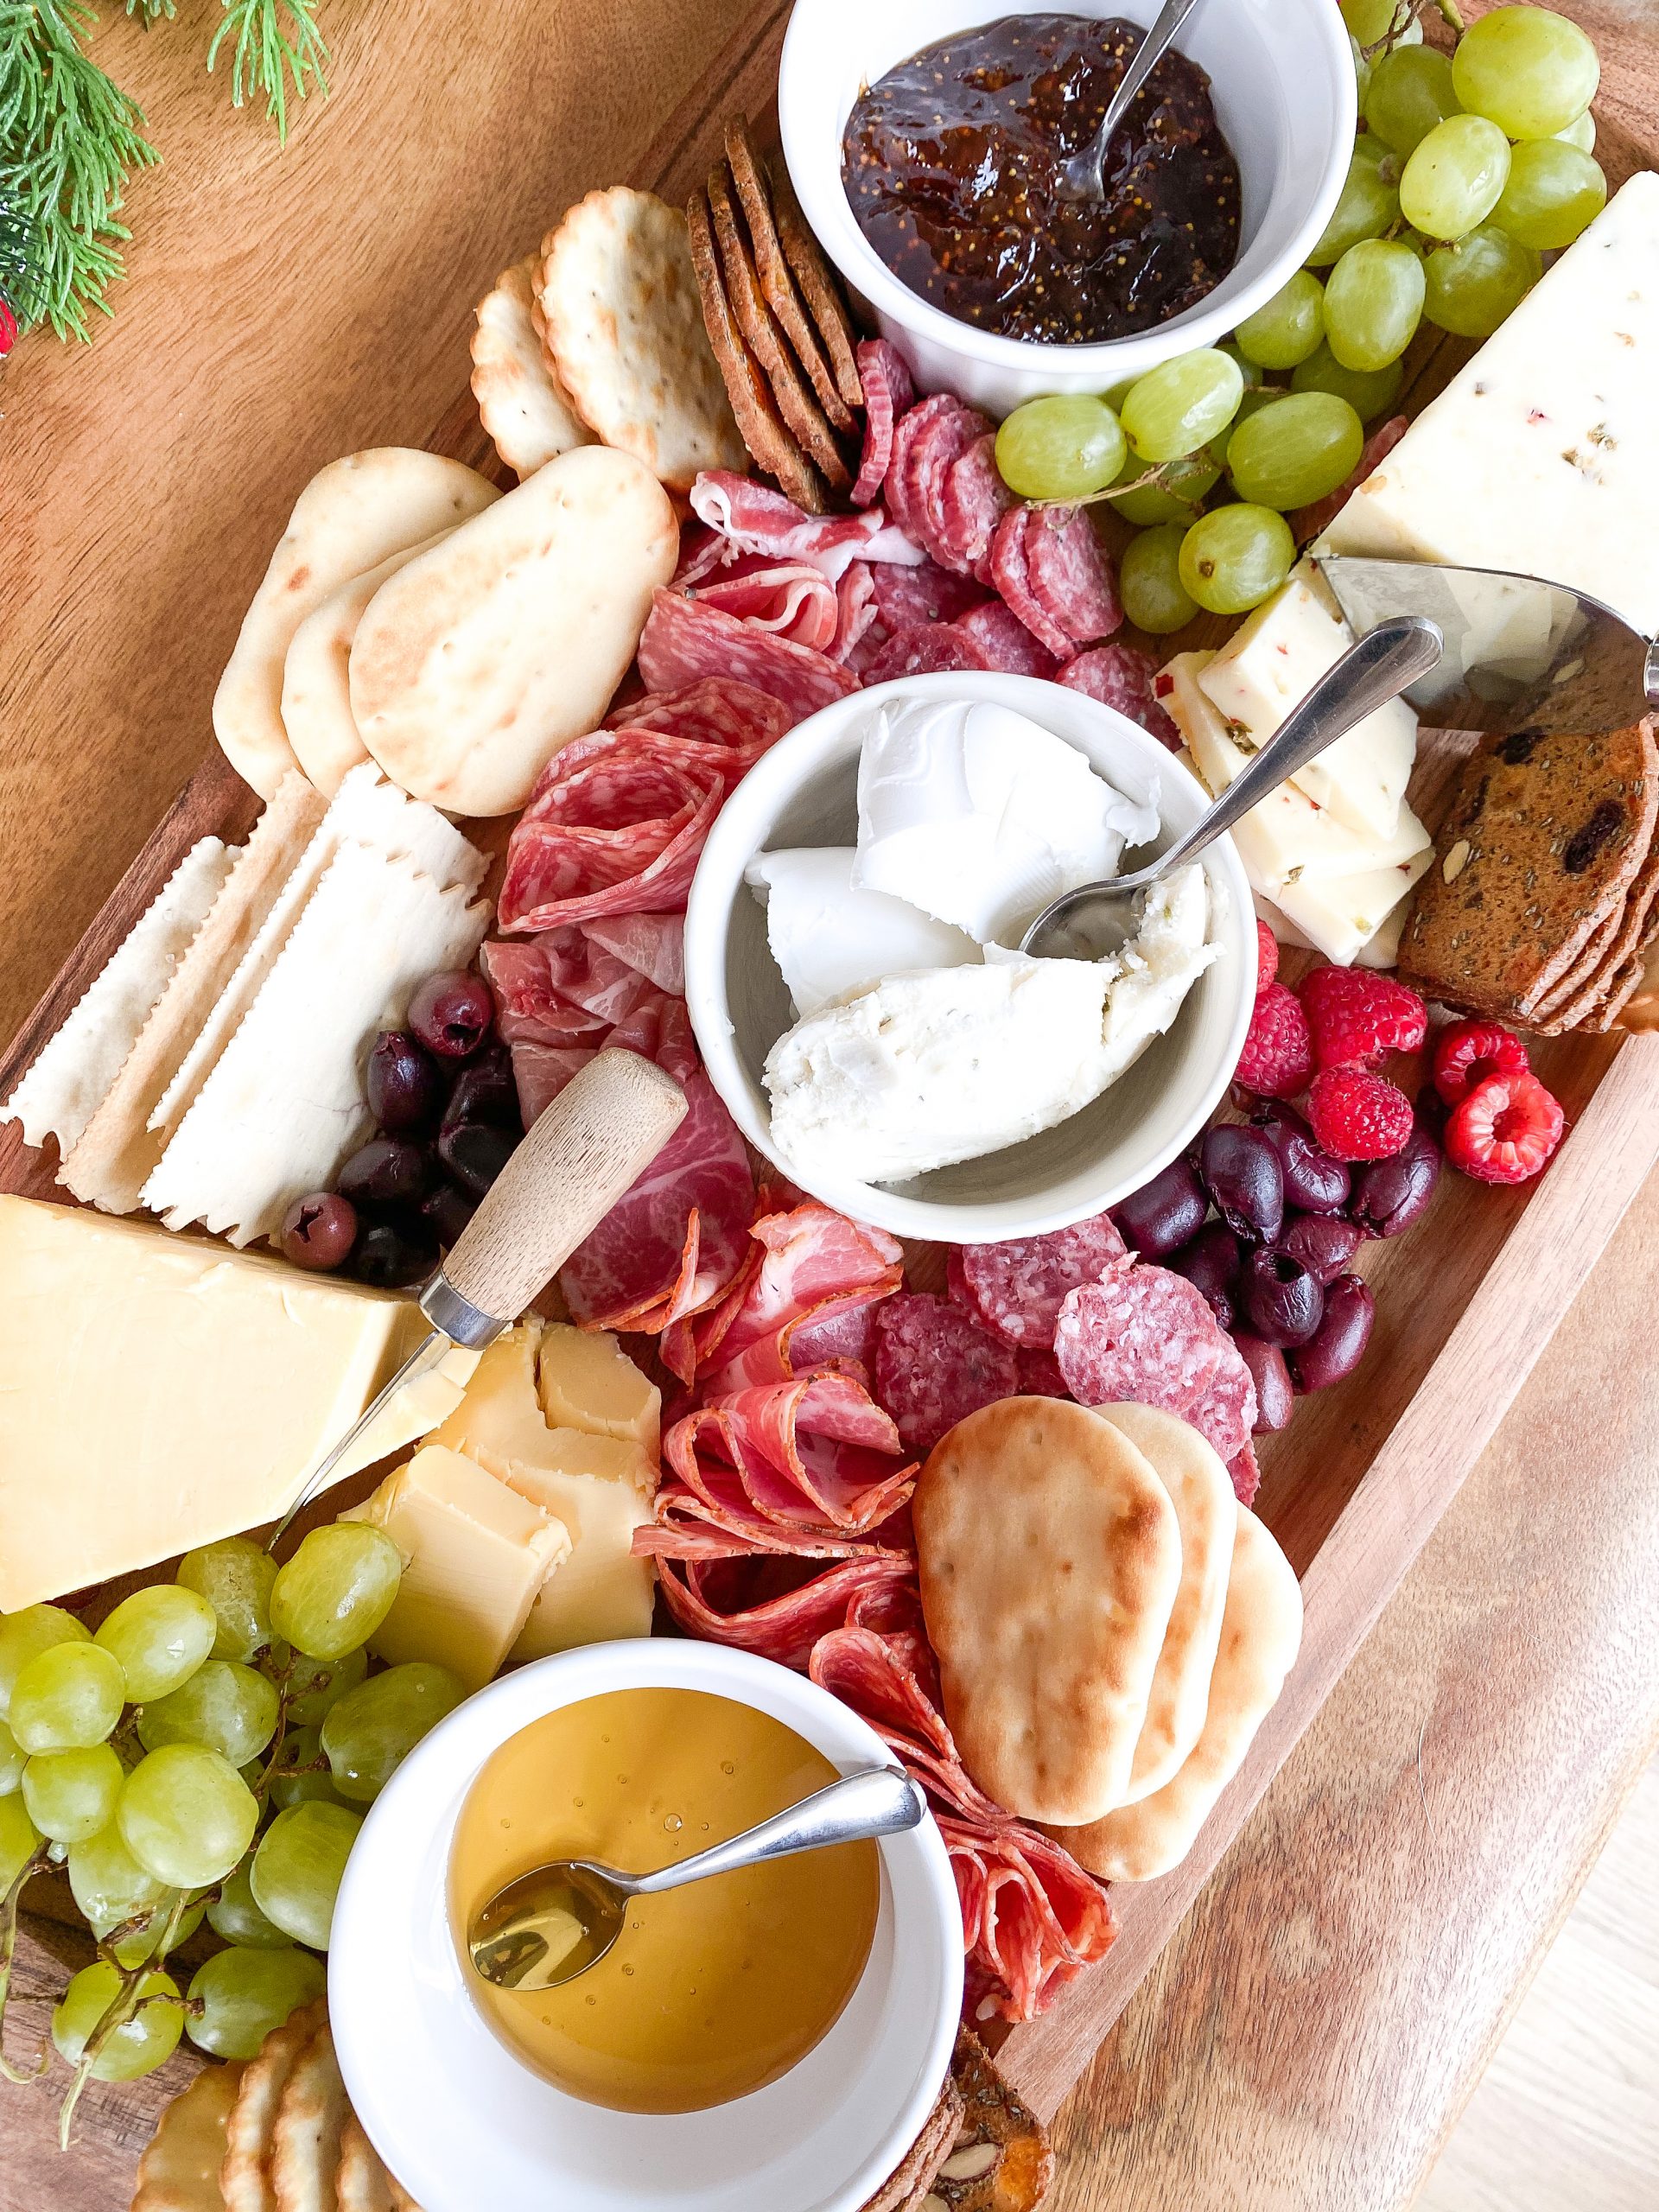 5 Easy Steps to Building a Charcuterie Board